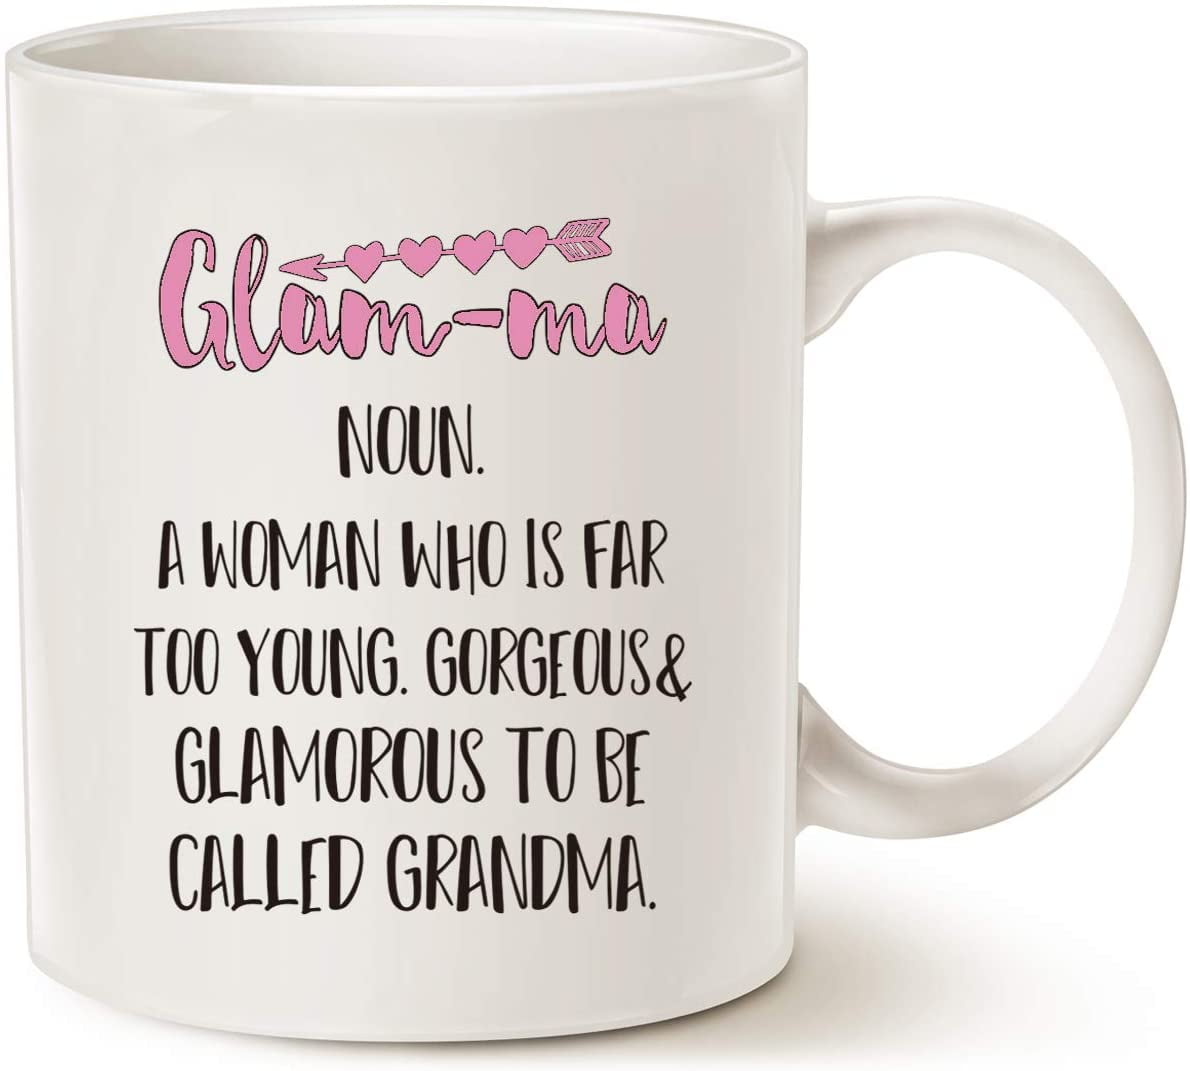 House Rules for Strong Women Coffee Mug for Mom Funny Mugs Happy